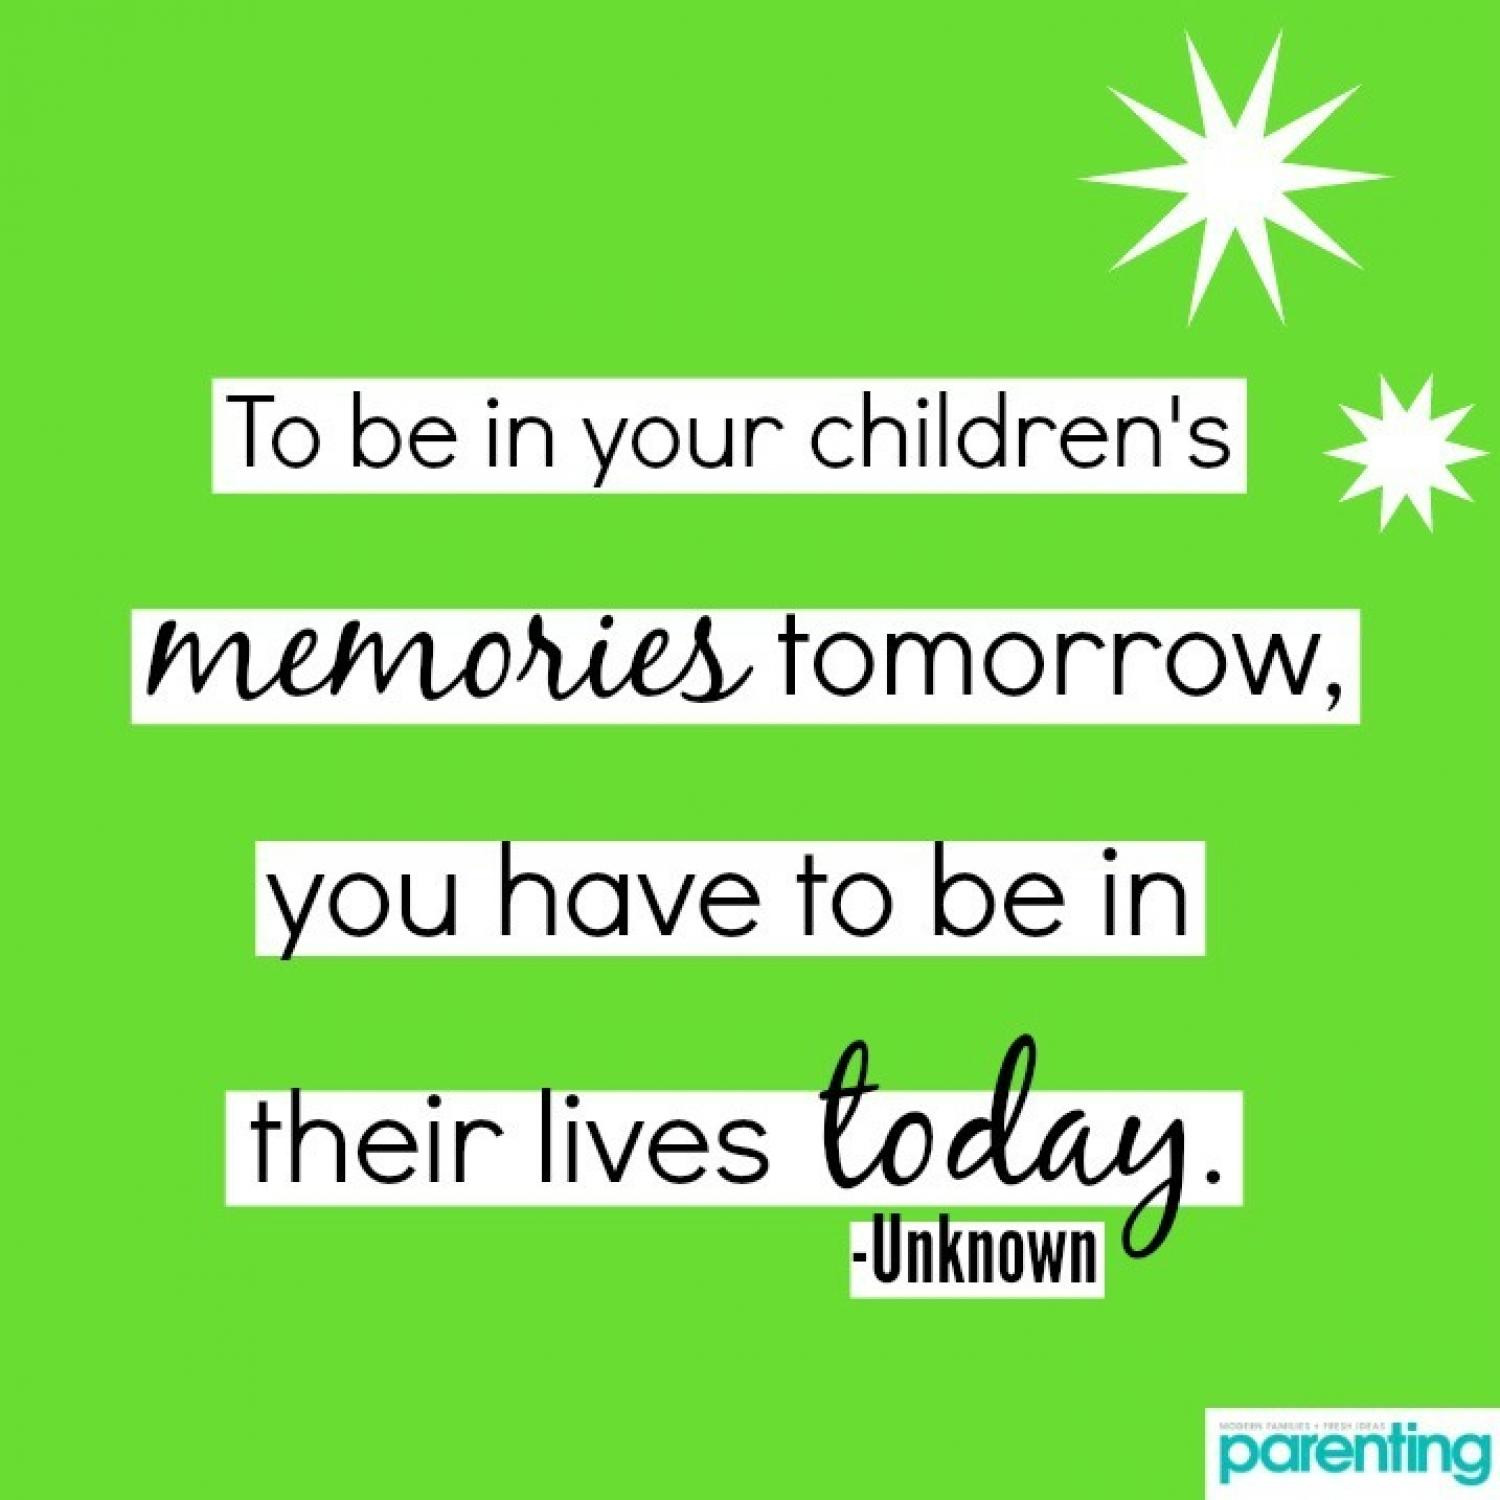 Parent Child Relationship Quotes
 17 Amazing Parenting Quotes That Will Make You a Better